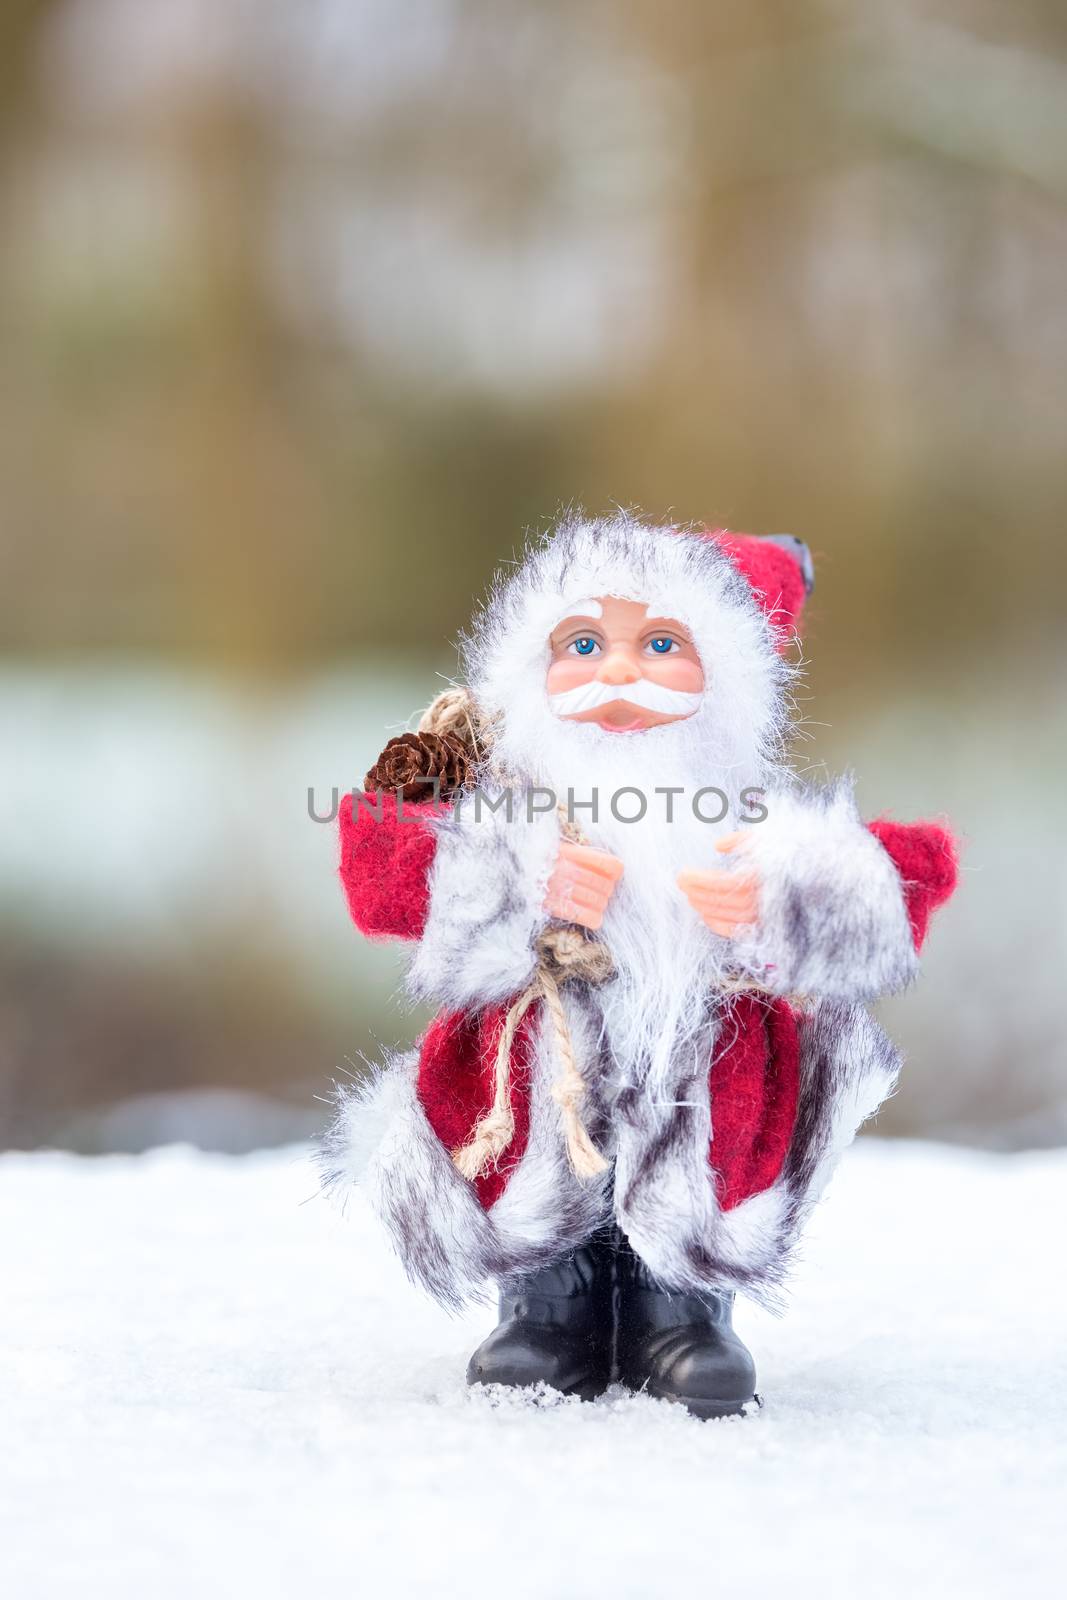 Model of Santa Claus standing in white snow outdoors by BenSchonewille